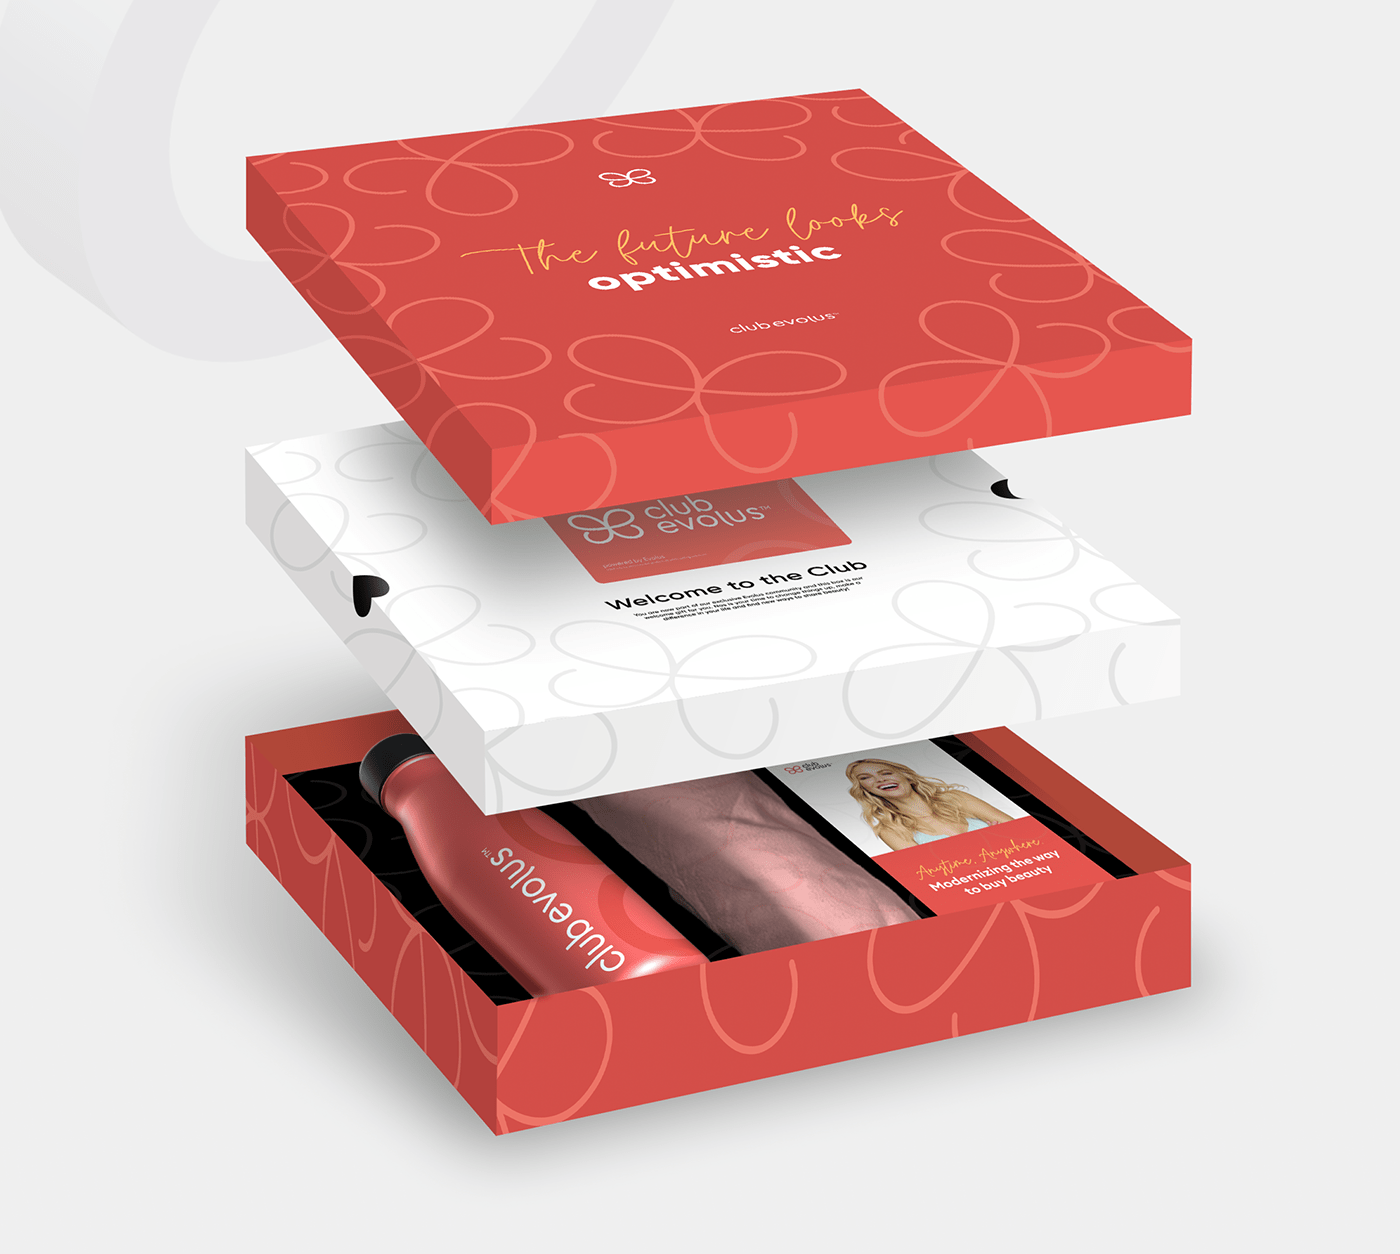 Evolus branded gift box containing branded collaterals, making use of the branding guidelines.